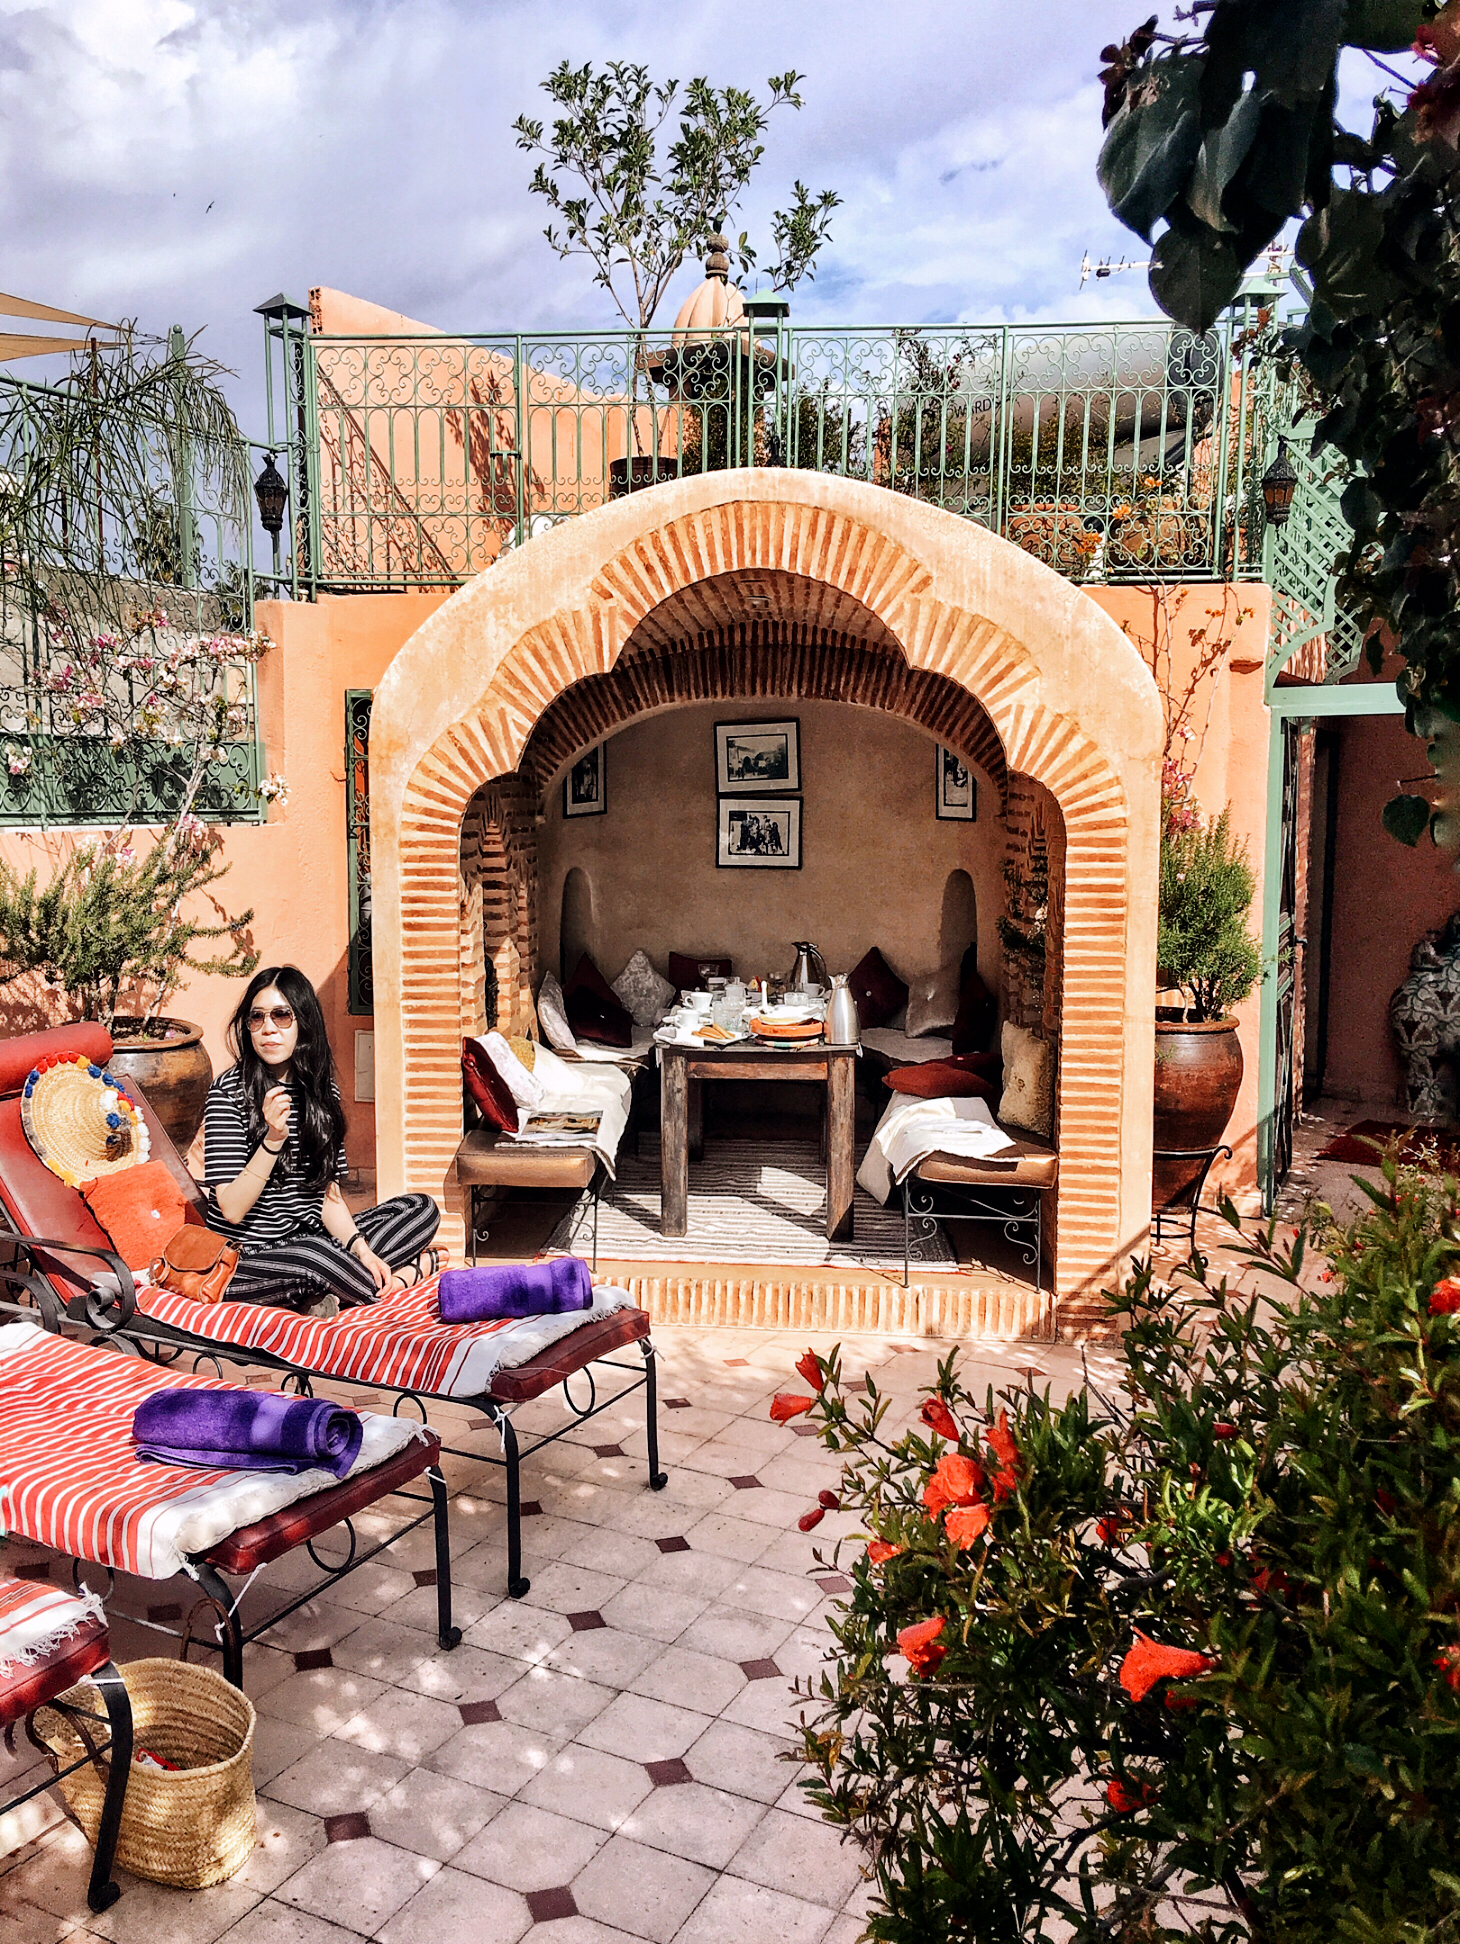 Peaceful mornings at Riad Anabel